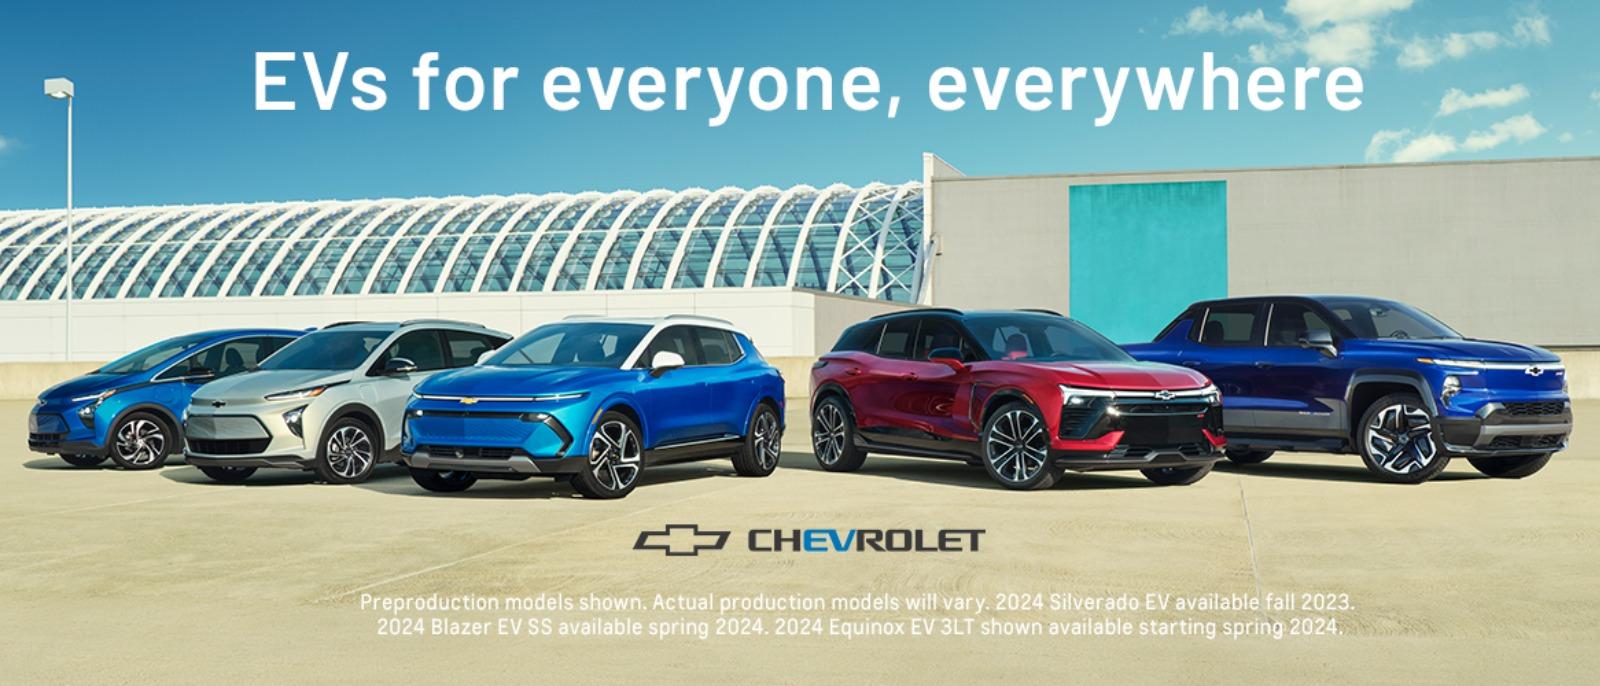 EVs for Everyone
Preproduction models shown. Actual production models will vary. 2024 Silverado EV available fall 2023. 2024 Blazer EV SS available spring 2024. 2024 Equinox EV 3LT shown available starting spring 2024